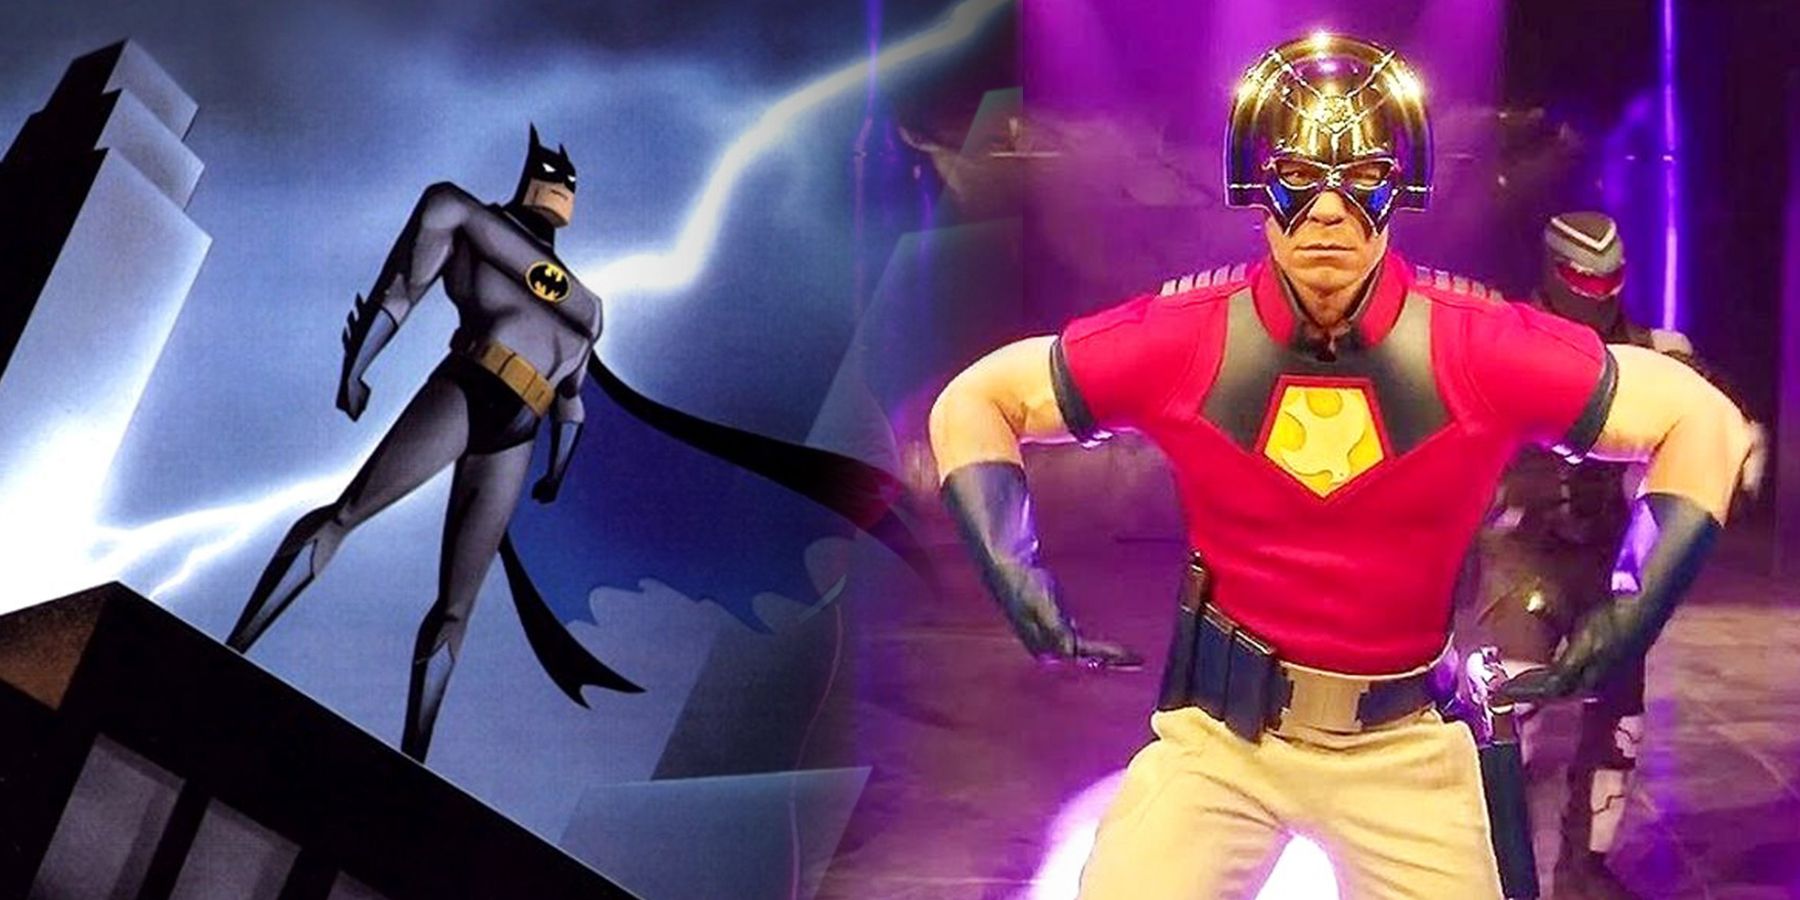 Batman on the left with a streak of lightning behind him with John Cena's Peacemaker flexing on the right